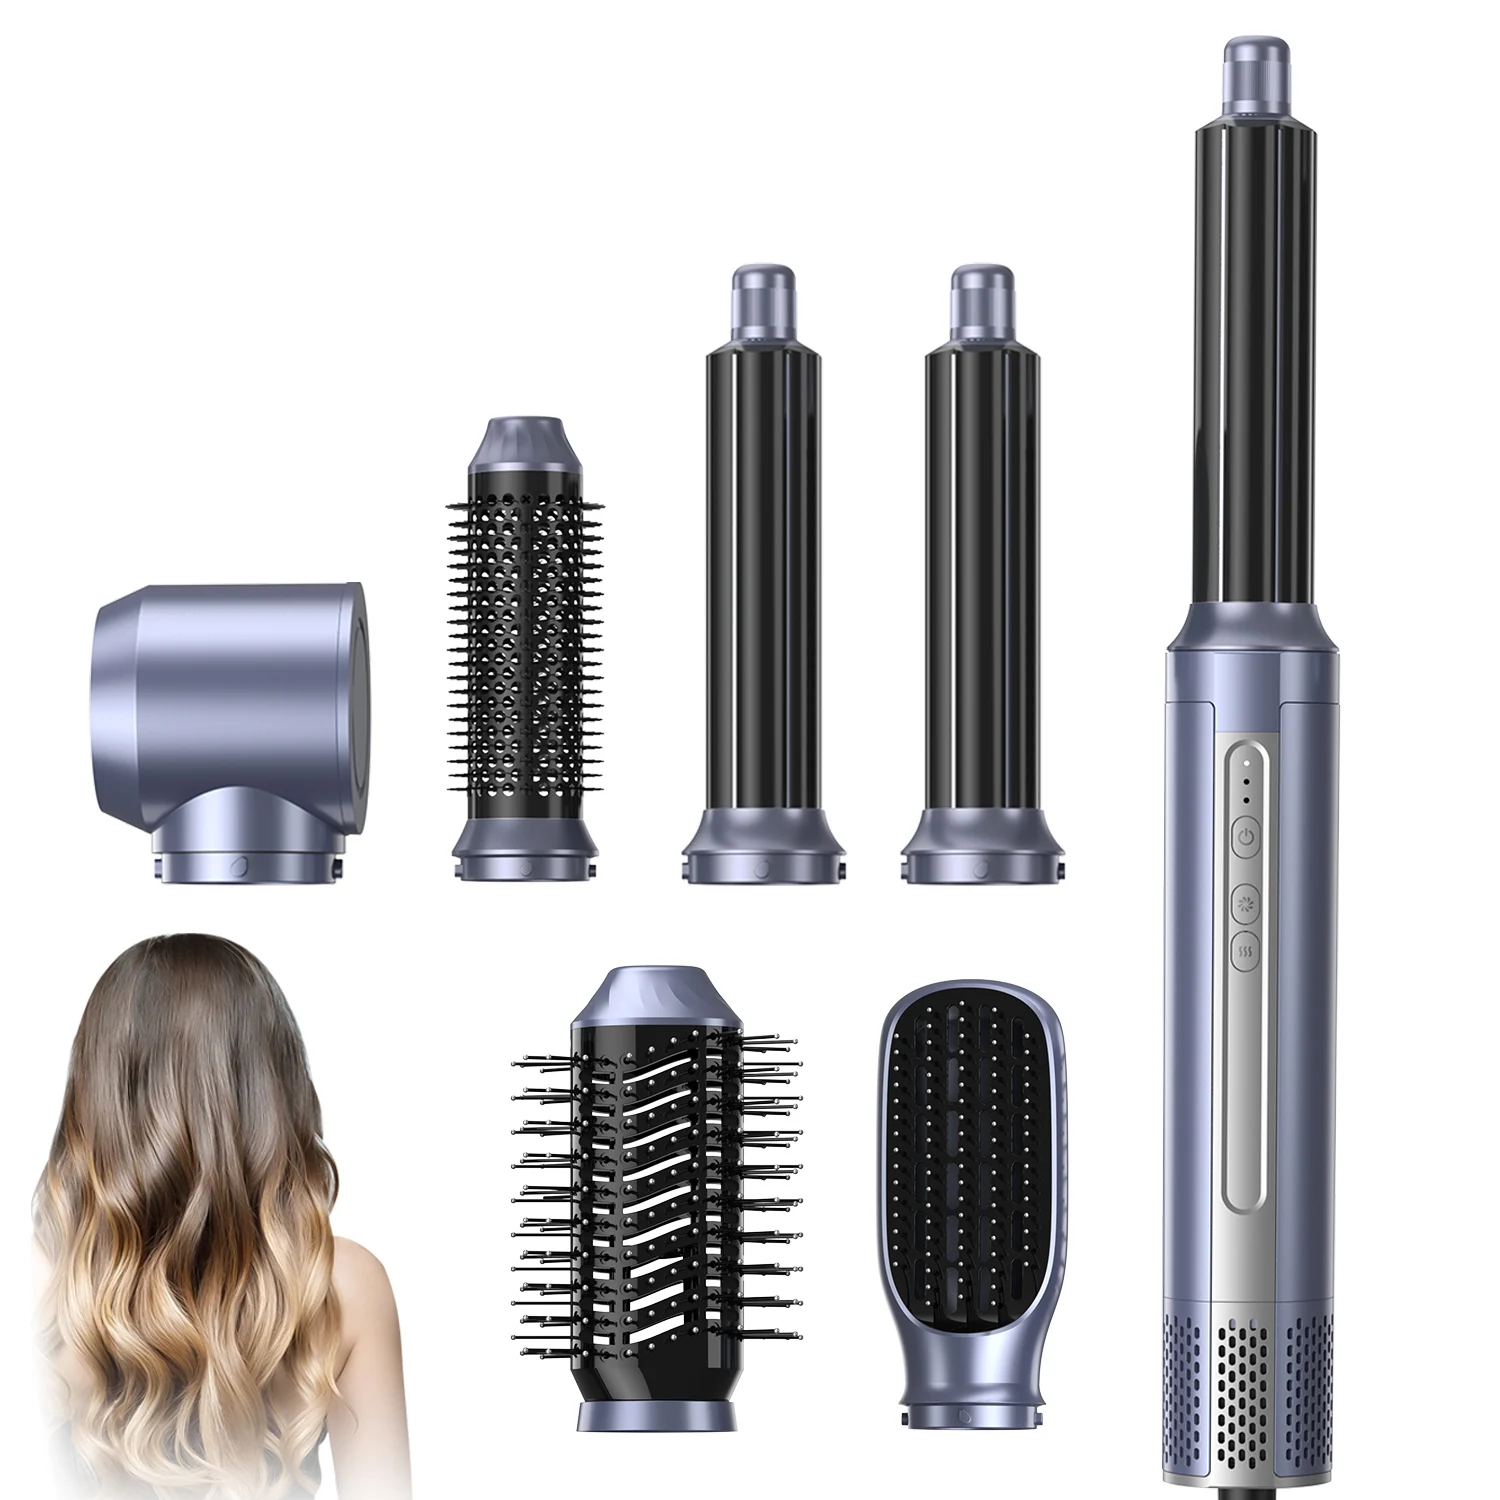 

6 In 1 Hair Dryer Brush High Speed Blow Dryer Comb Negative Ionic Hair Blower Brush Air Styliing Curling Iron Air Curler Wand